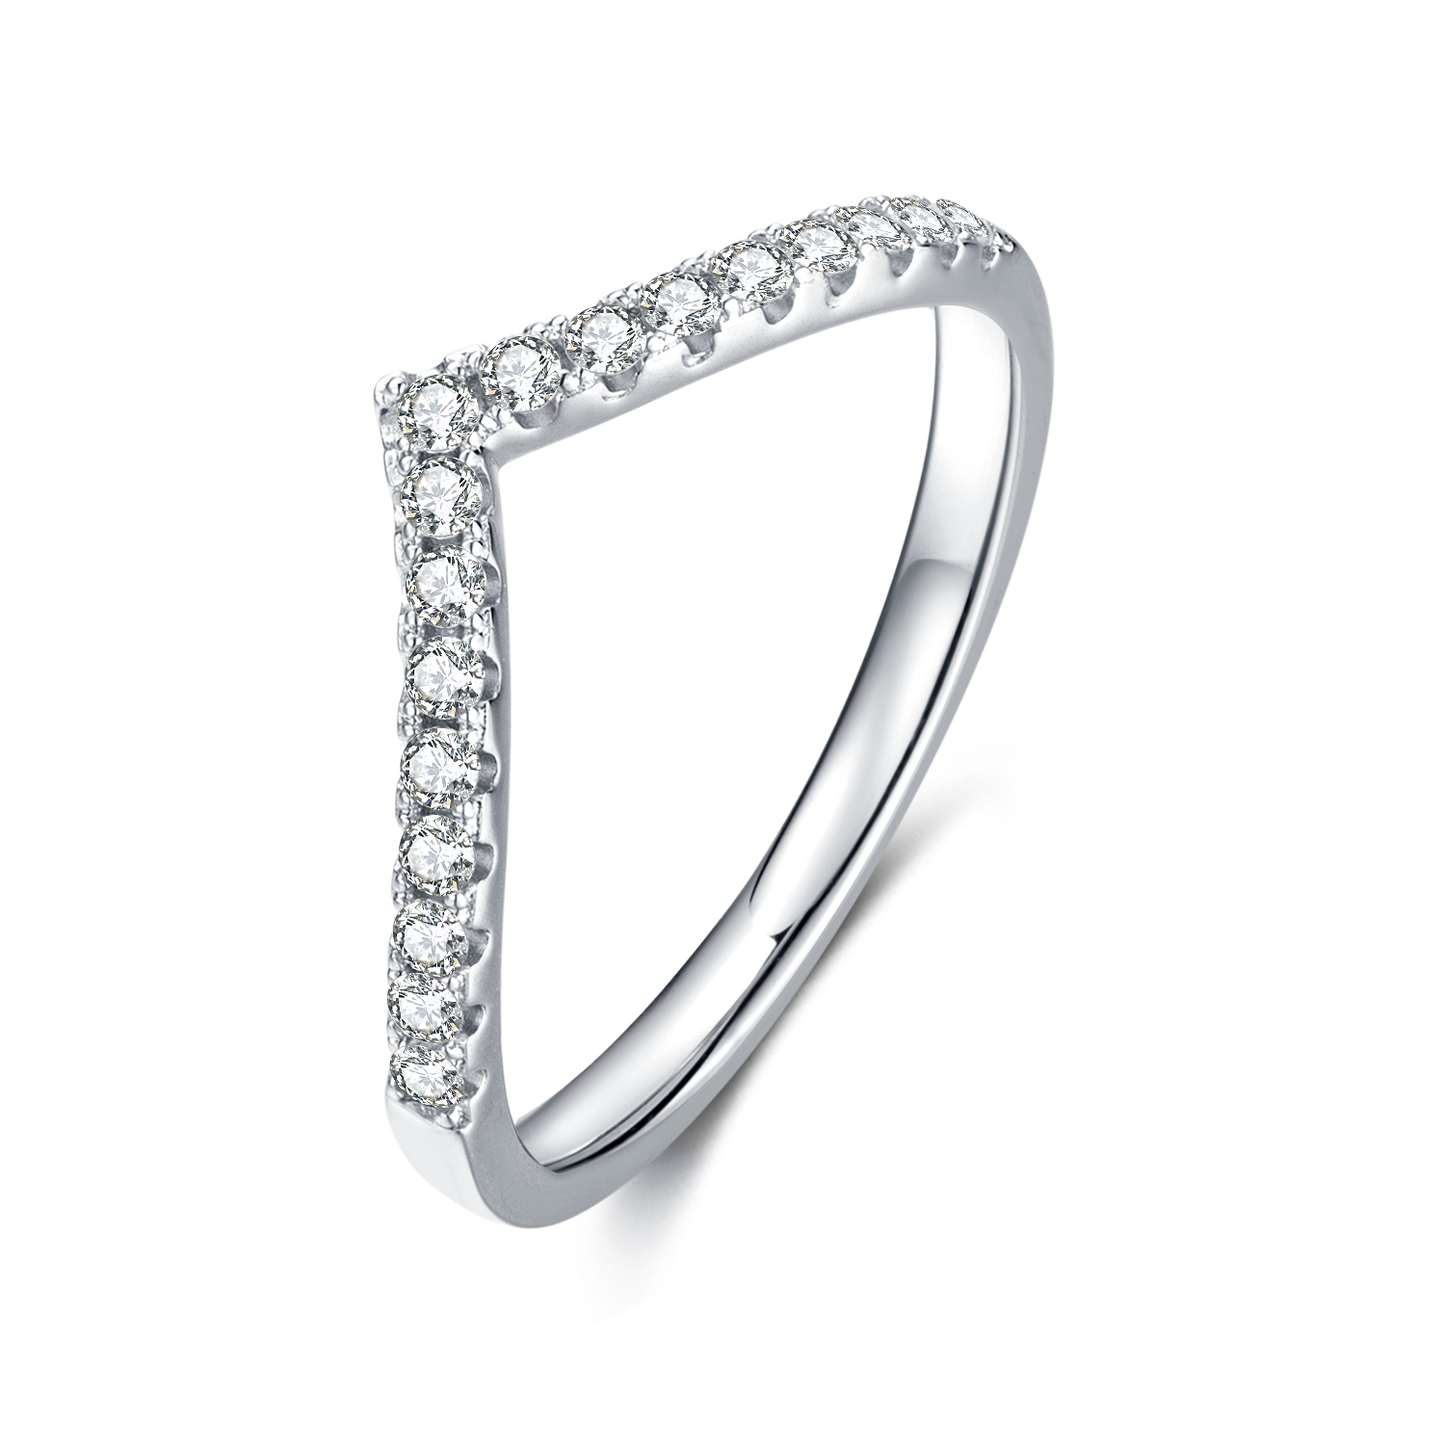 A silver chevron style eternity wedding ring prong set with moissanites